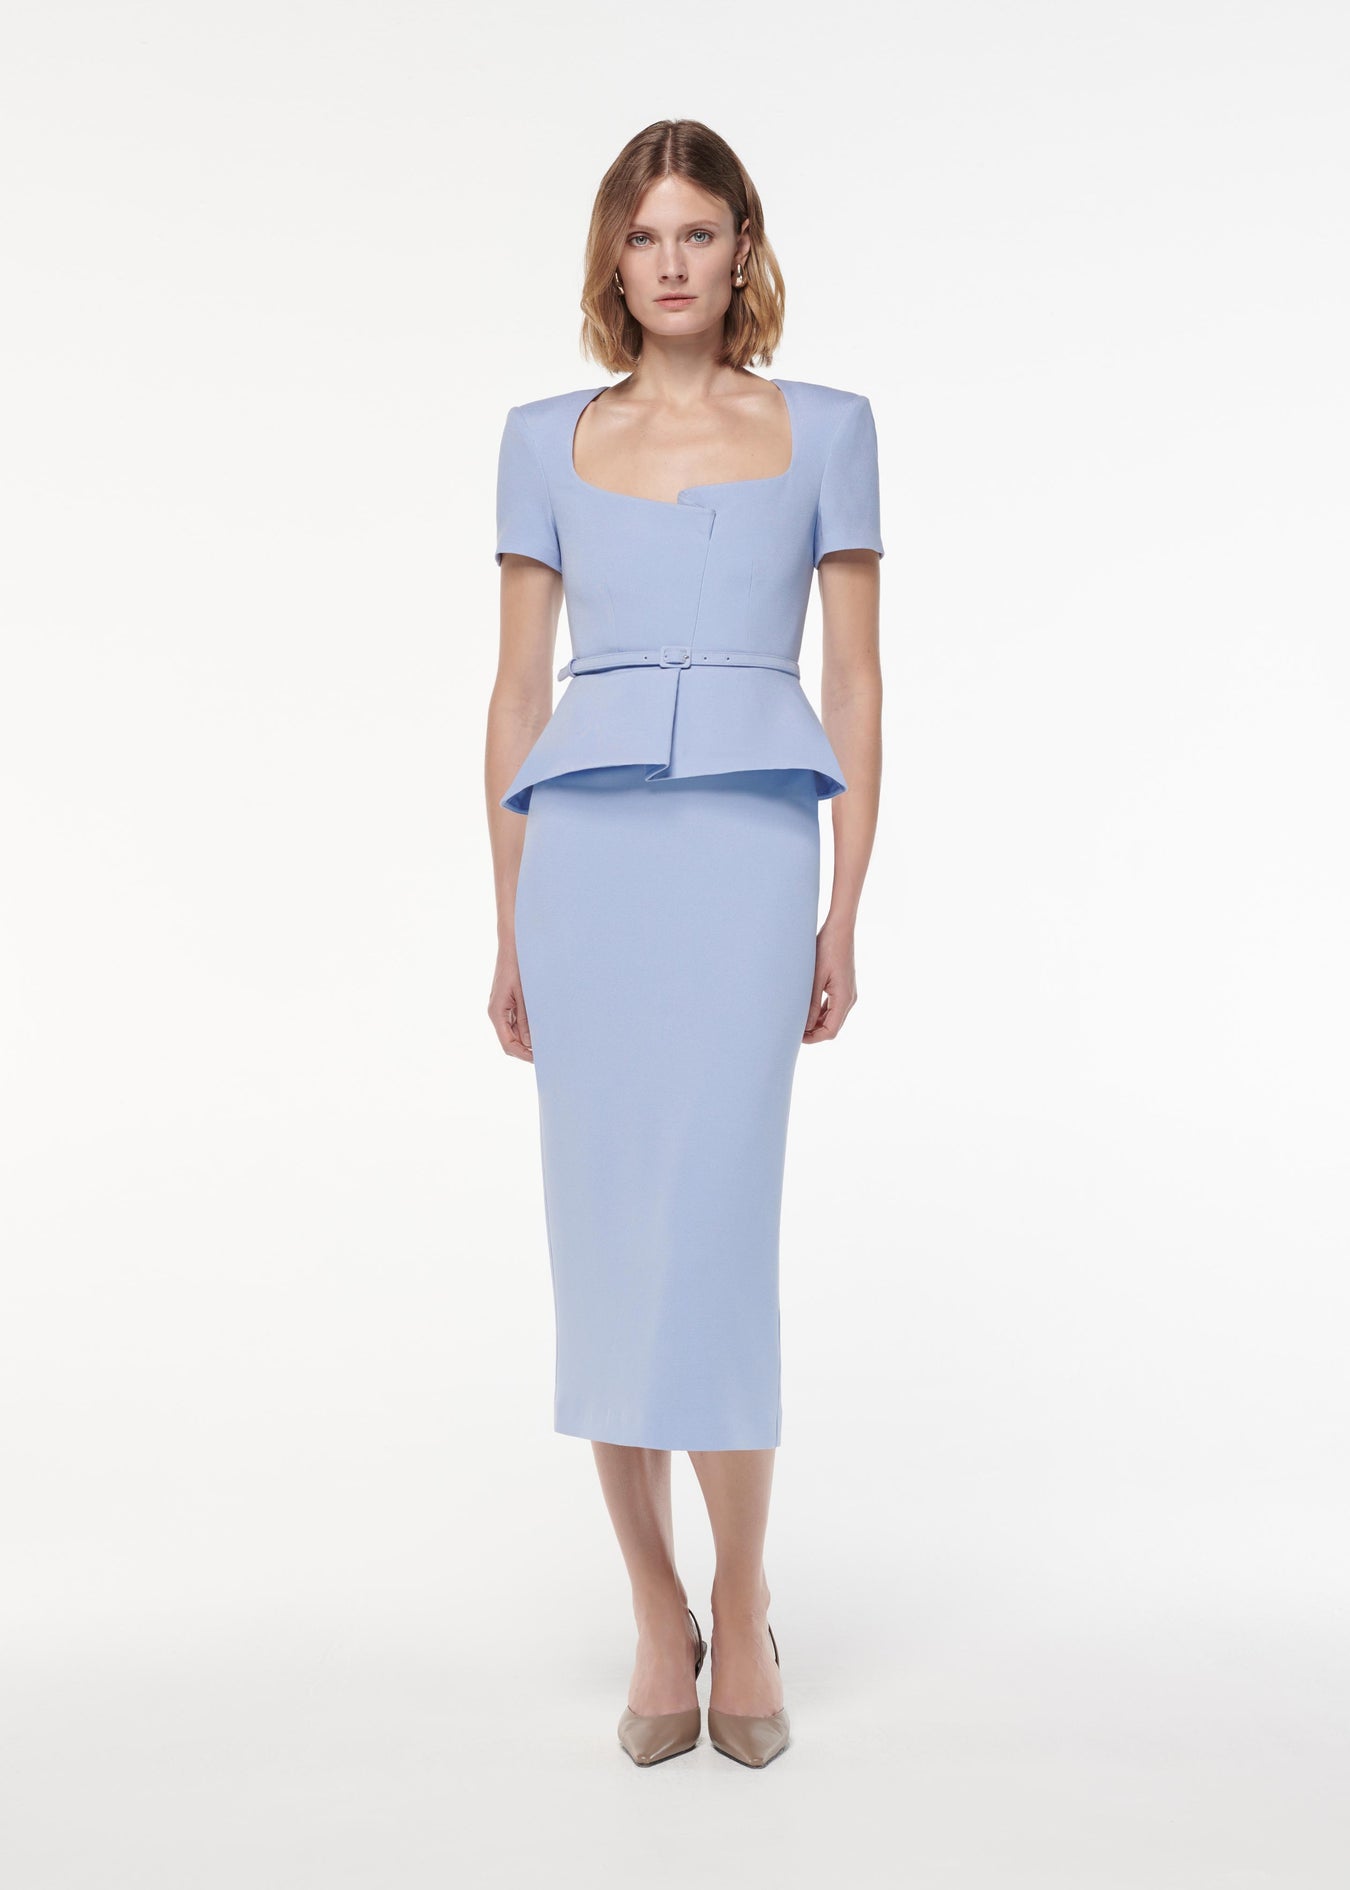 A photograph of a woman wearing a Short Sleeve Stretch Wool Silk Midi Dress in Blue